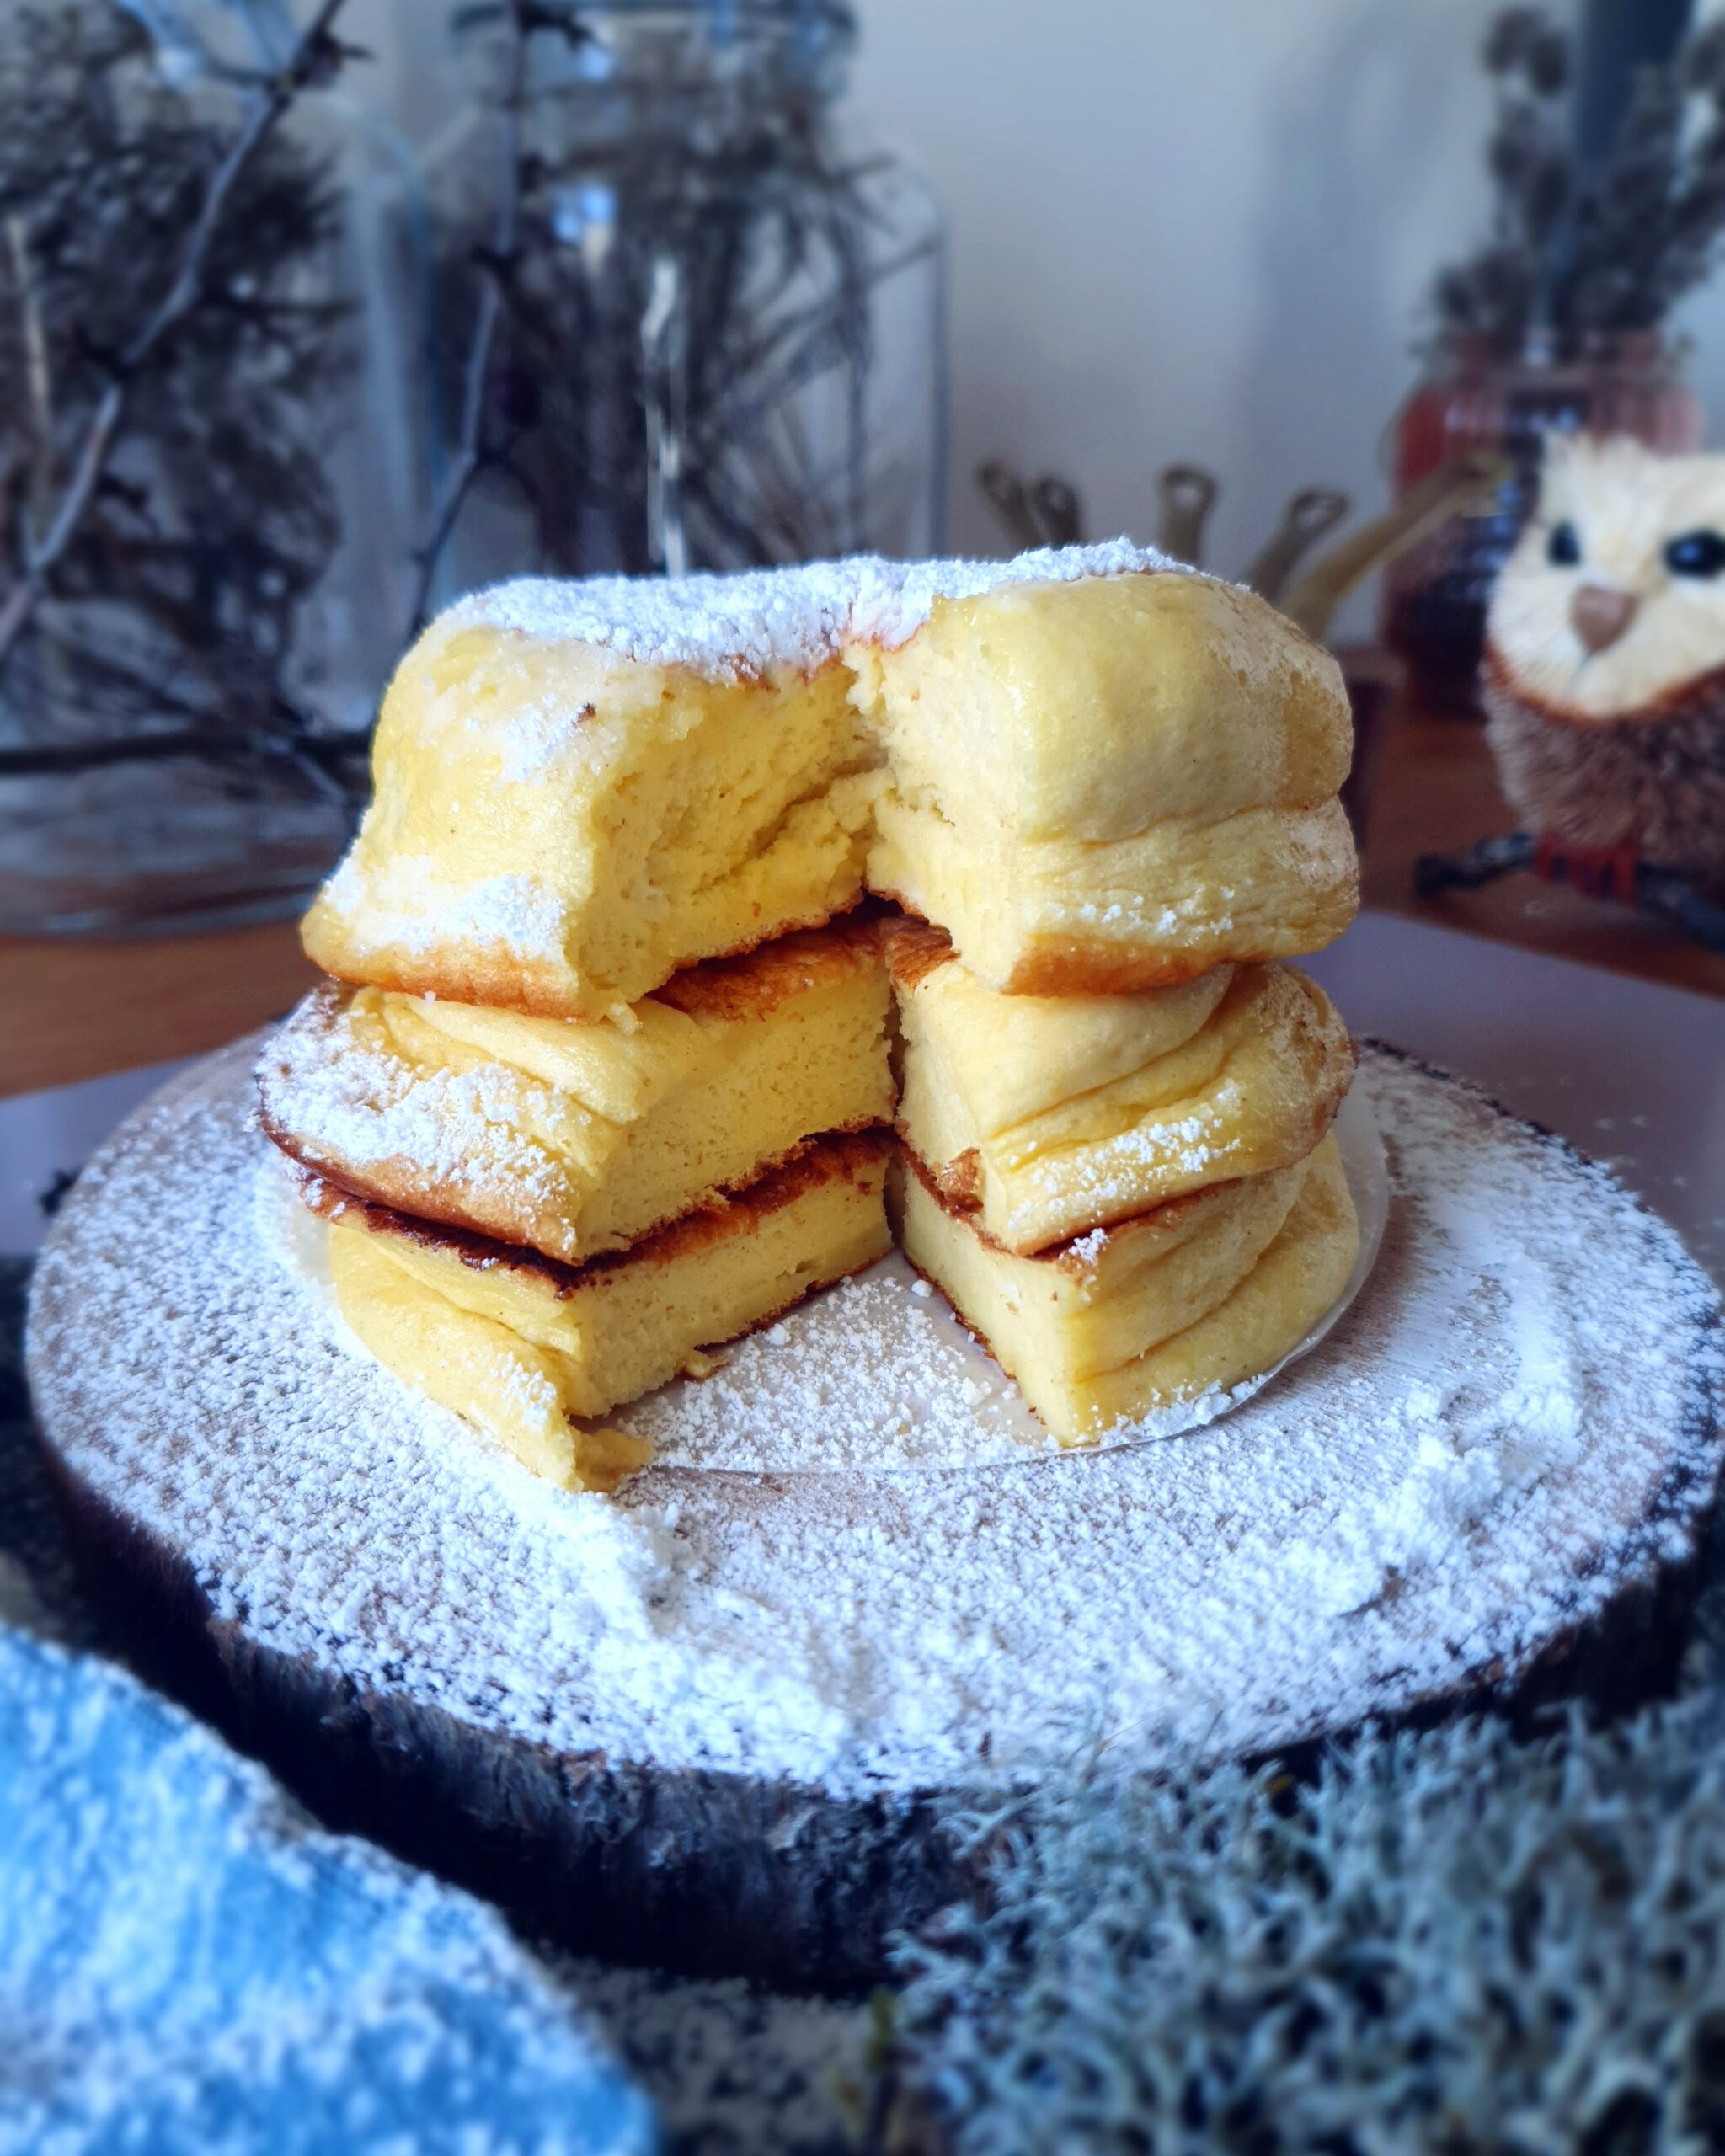 Les Petits Chaudrons - Fluffy Witchy pancakes !